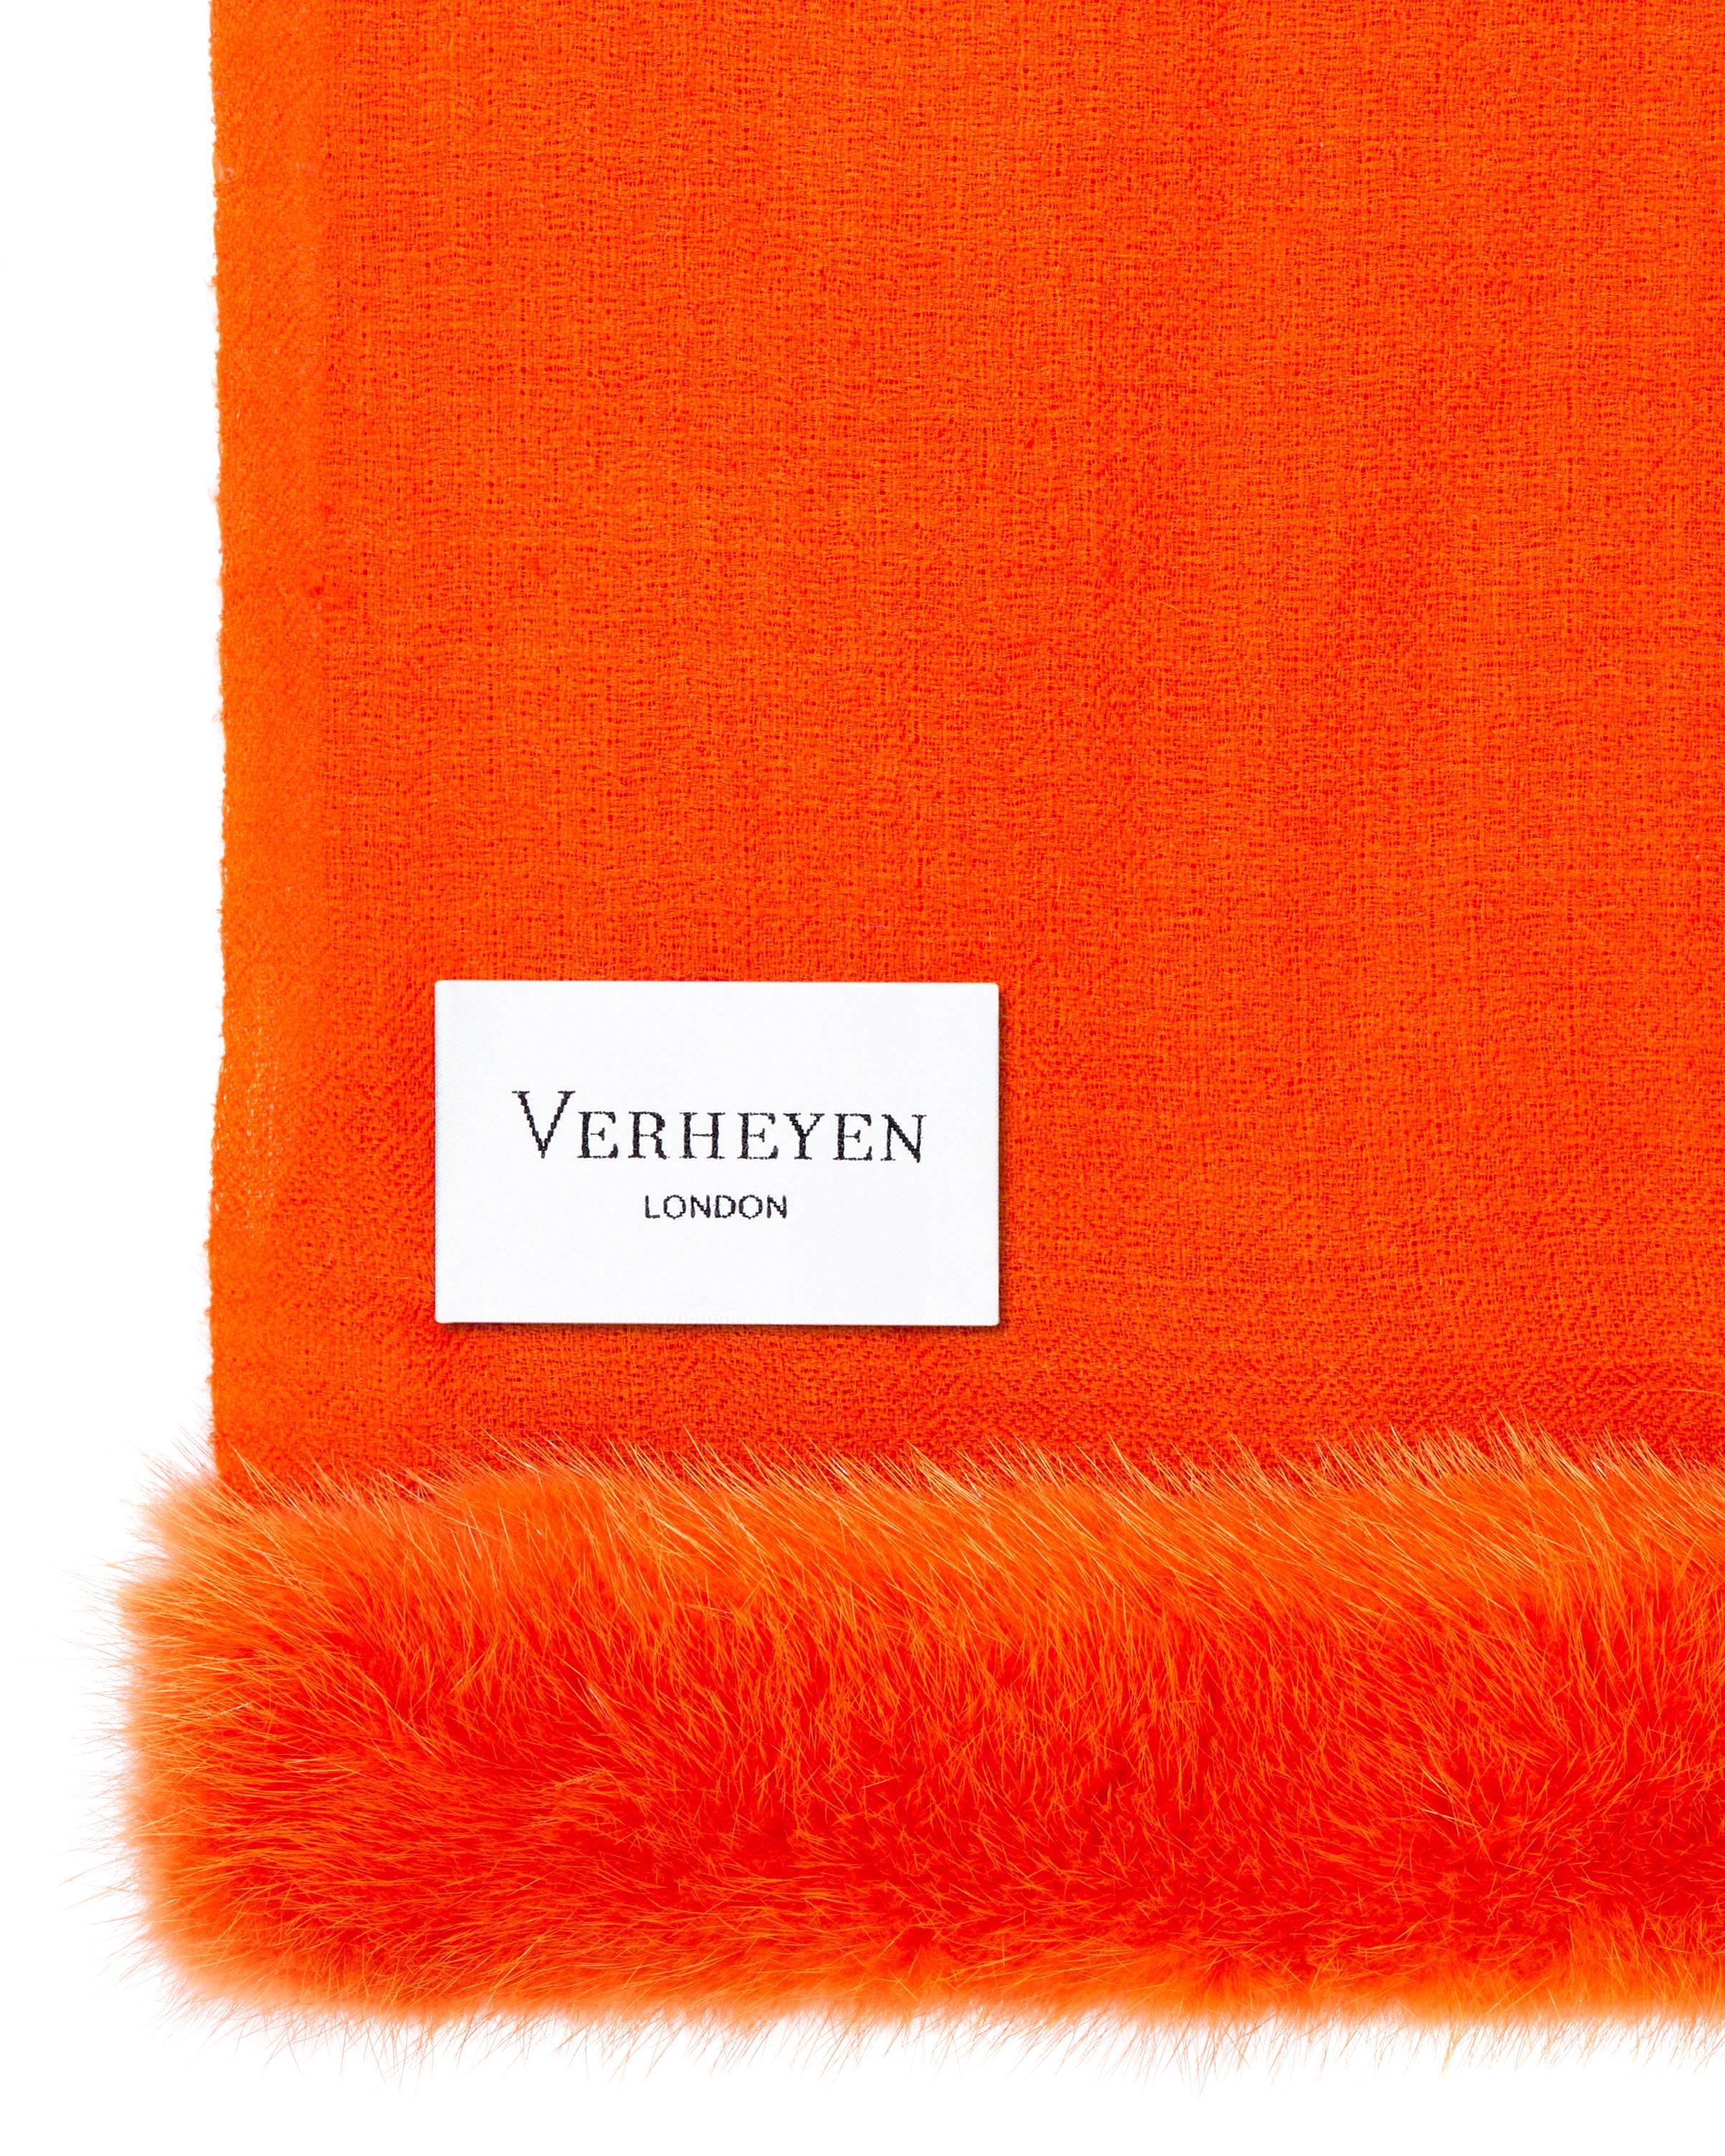 Verheyen London Handwoven Mink Fur Trimmed Orange Cashmere Shawl - Brand New 

Verheyen London’s shawl is spun from the finest lightweight handwoven cashmere from Kashmir and finished with the most exquisite dyed mink. Its warmth envelopes you with